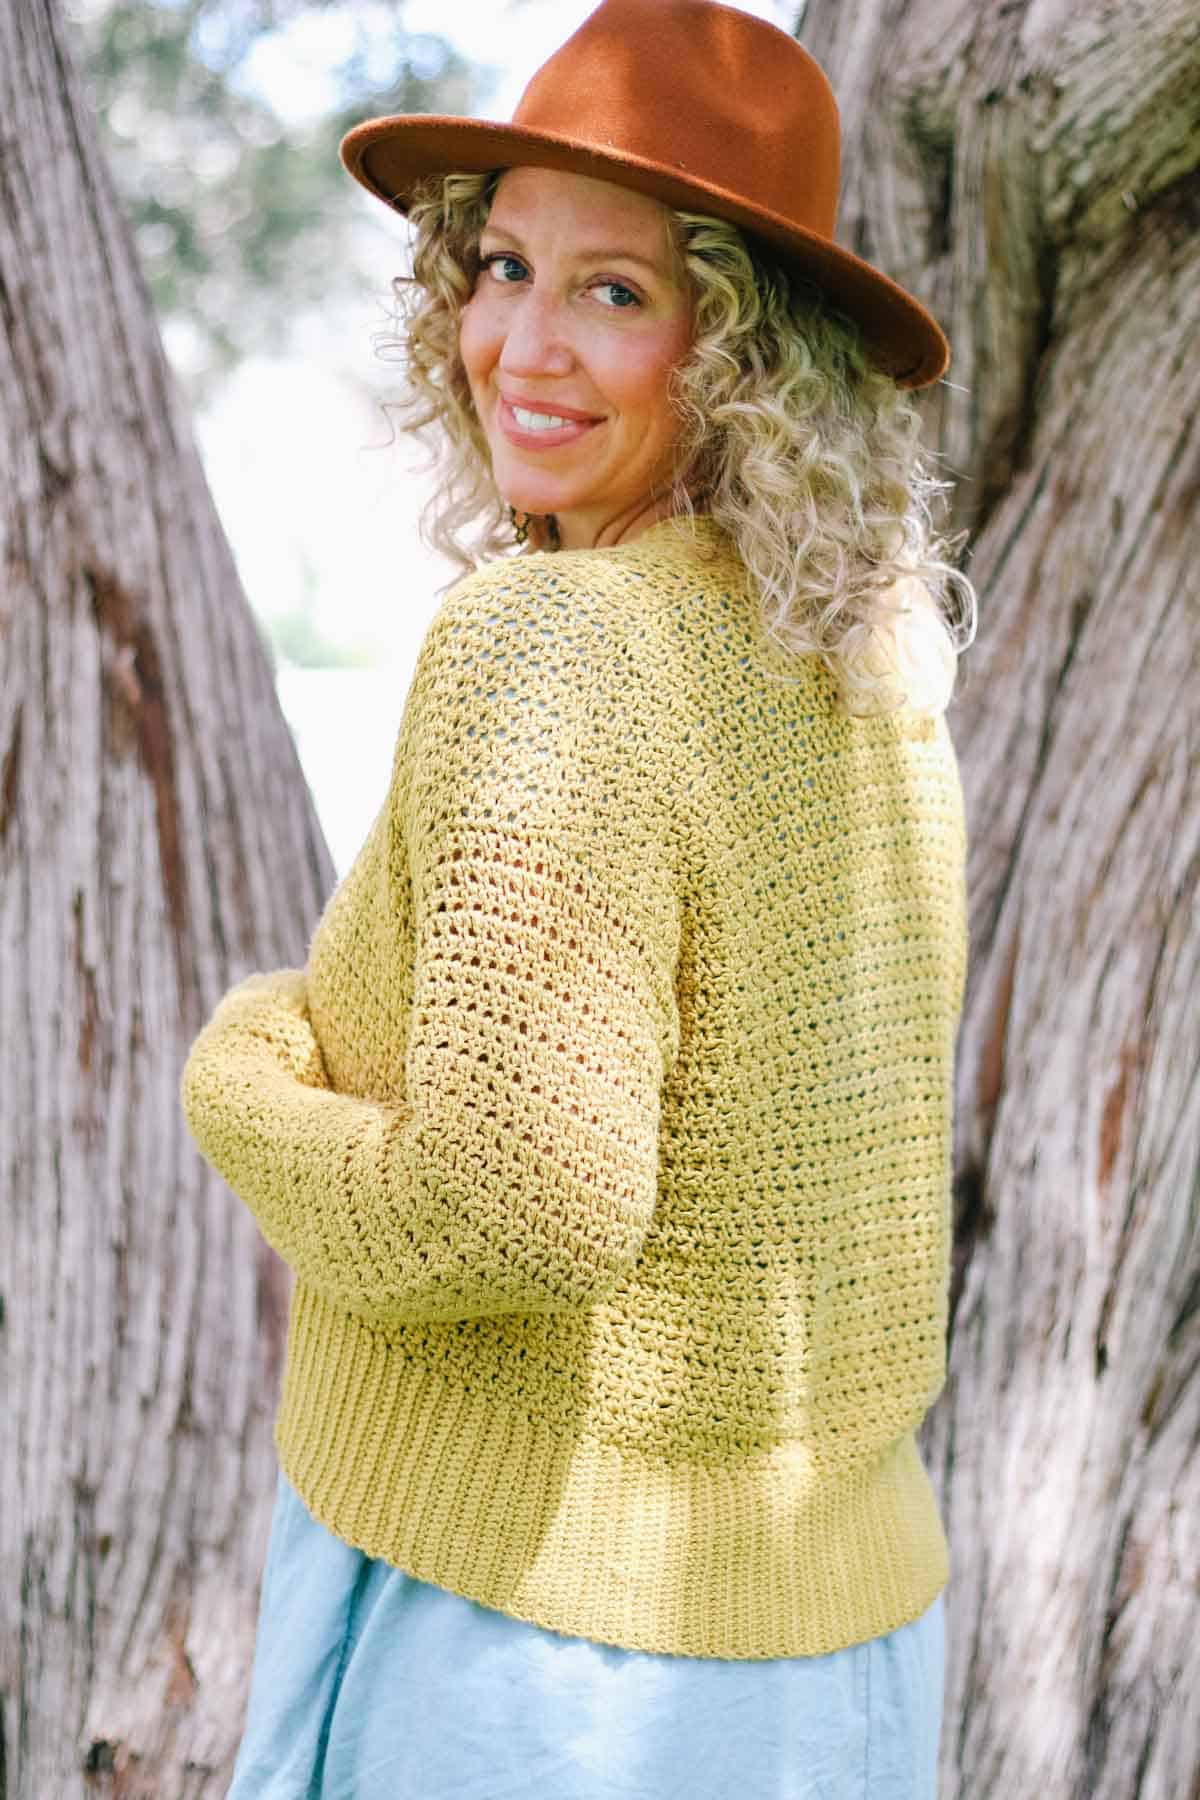 A woman wearing a cropped crochet sweater smiling over her shoulder.